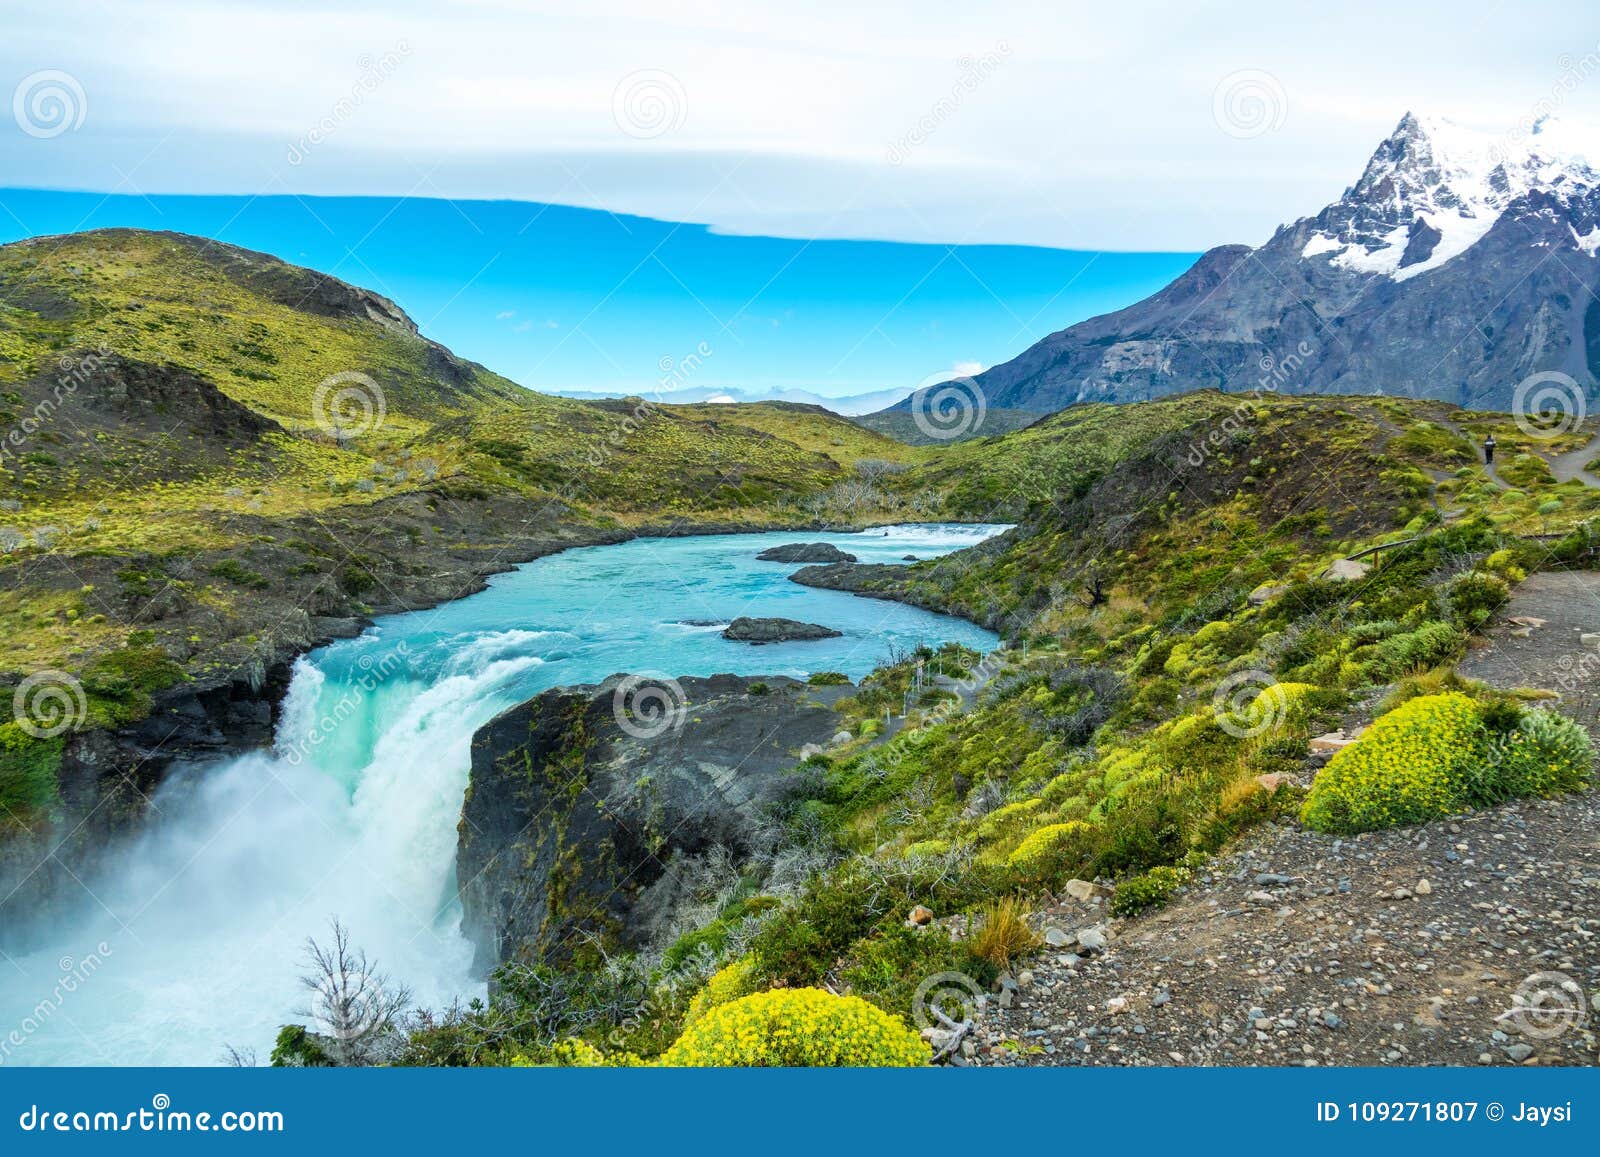 salto grande waterfall in national park torres del paine, patagonia chile, south america